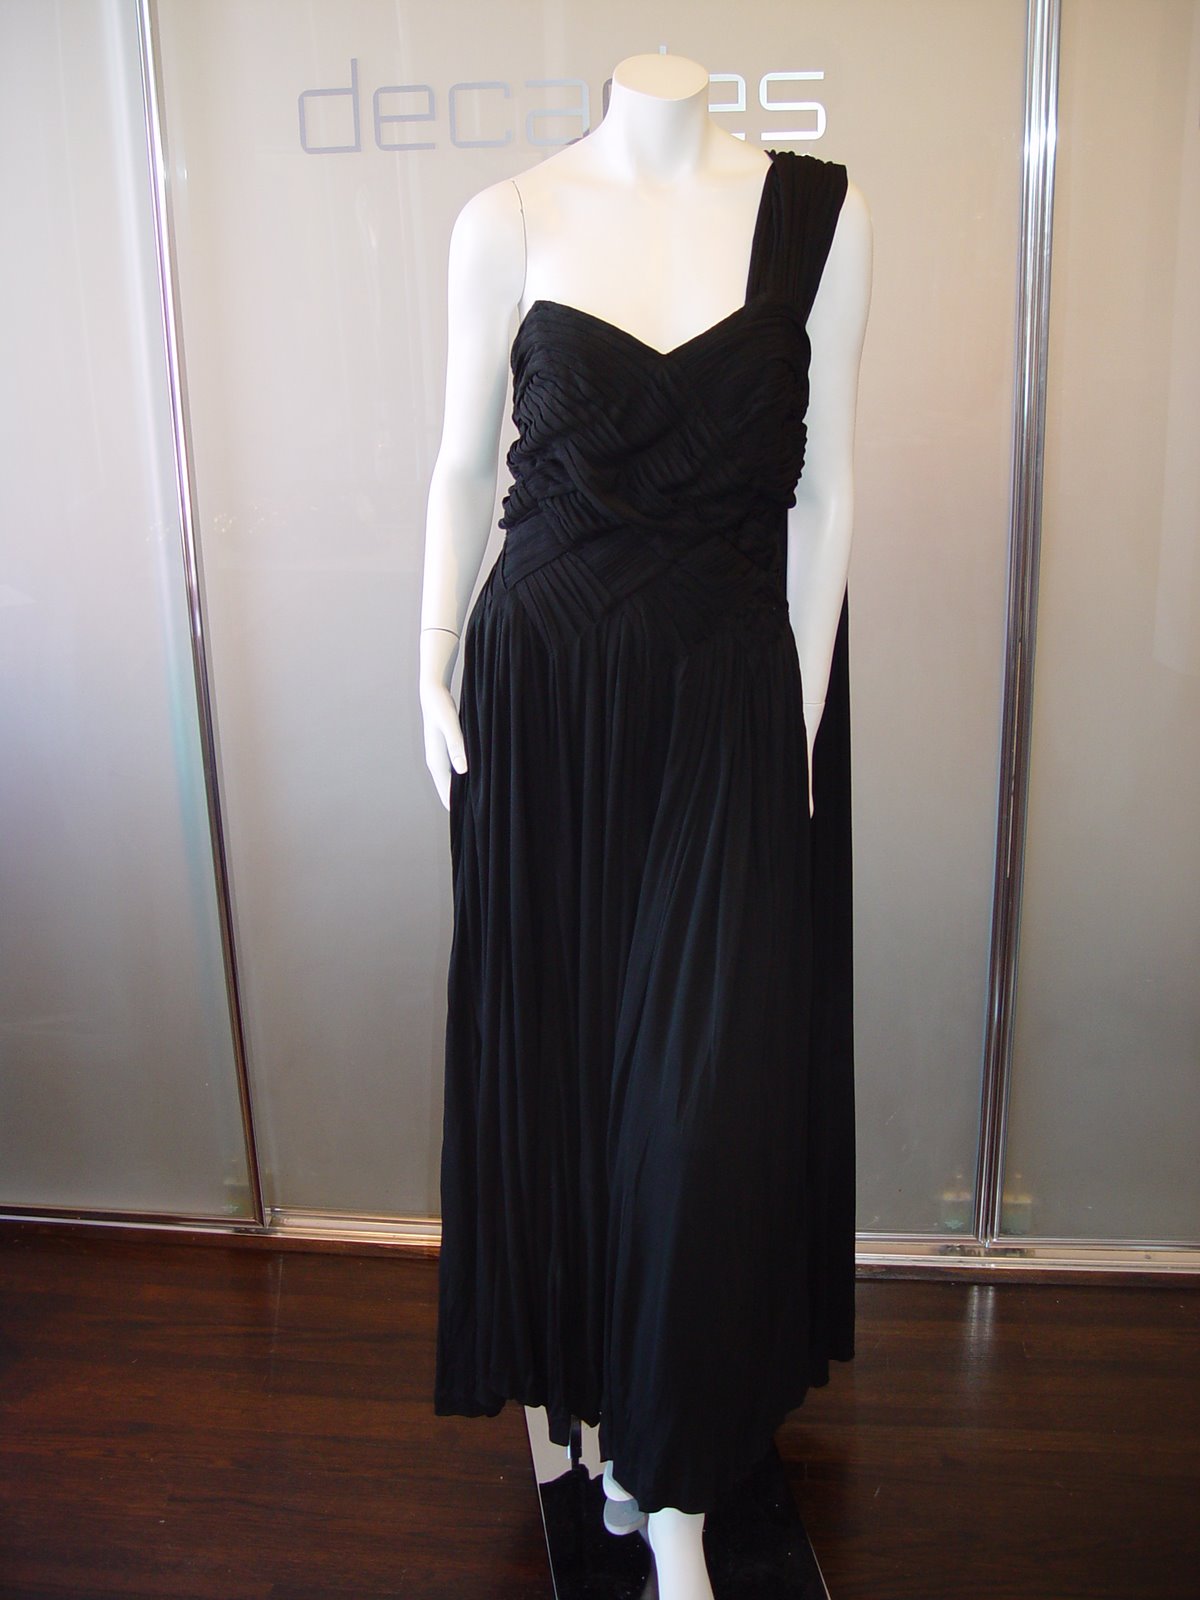 [MADAME+GRES+HAUTE+COUTURE+BLACK+STRAPLESS+SIGNATURE+JERSEY+WITH+SHOULDER+DRAPE+C+60S.JPG+(1).JPG]